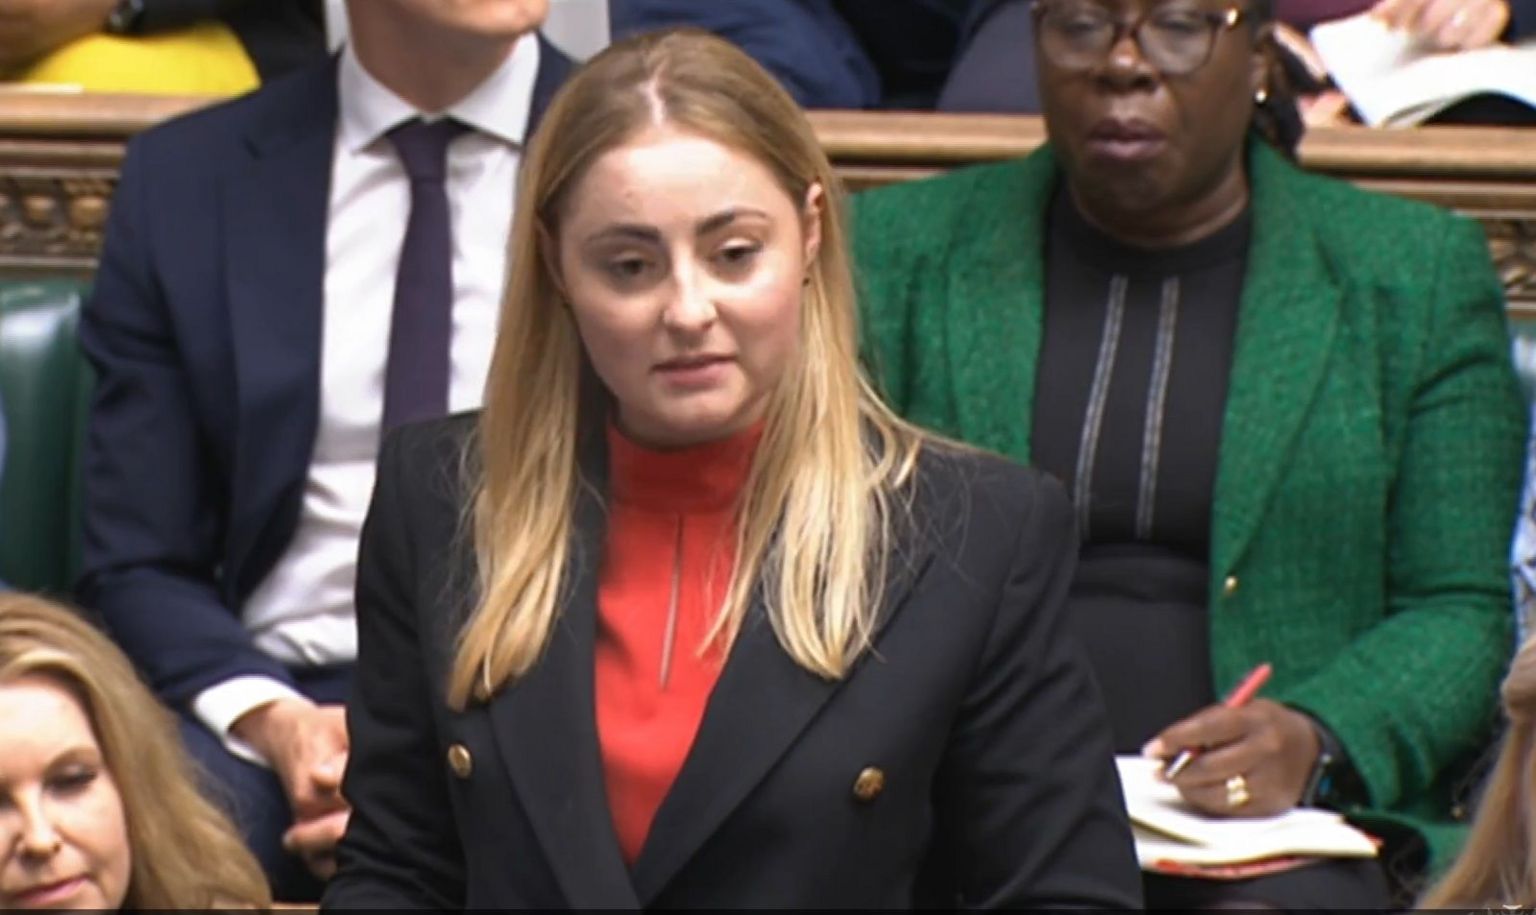 Gen Kitchen, with long blond hair, wearing red top and black jacket standing in the House of Commons